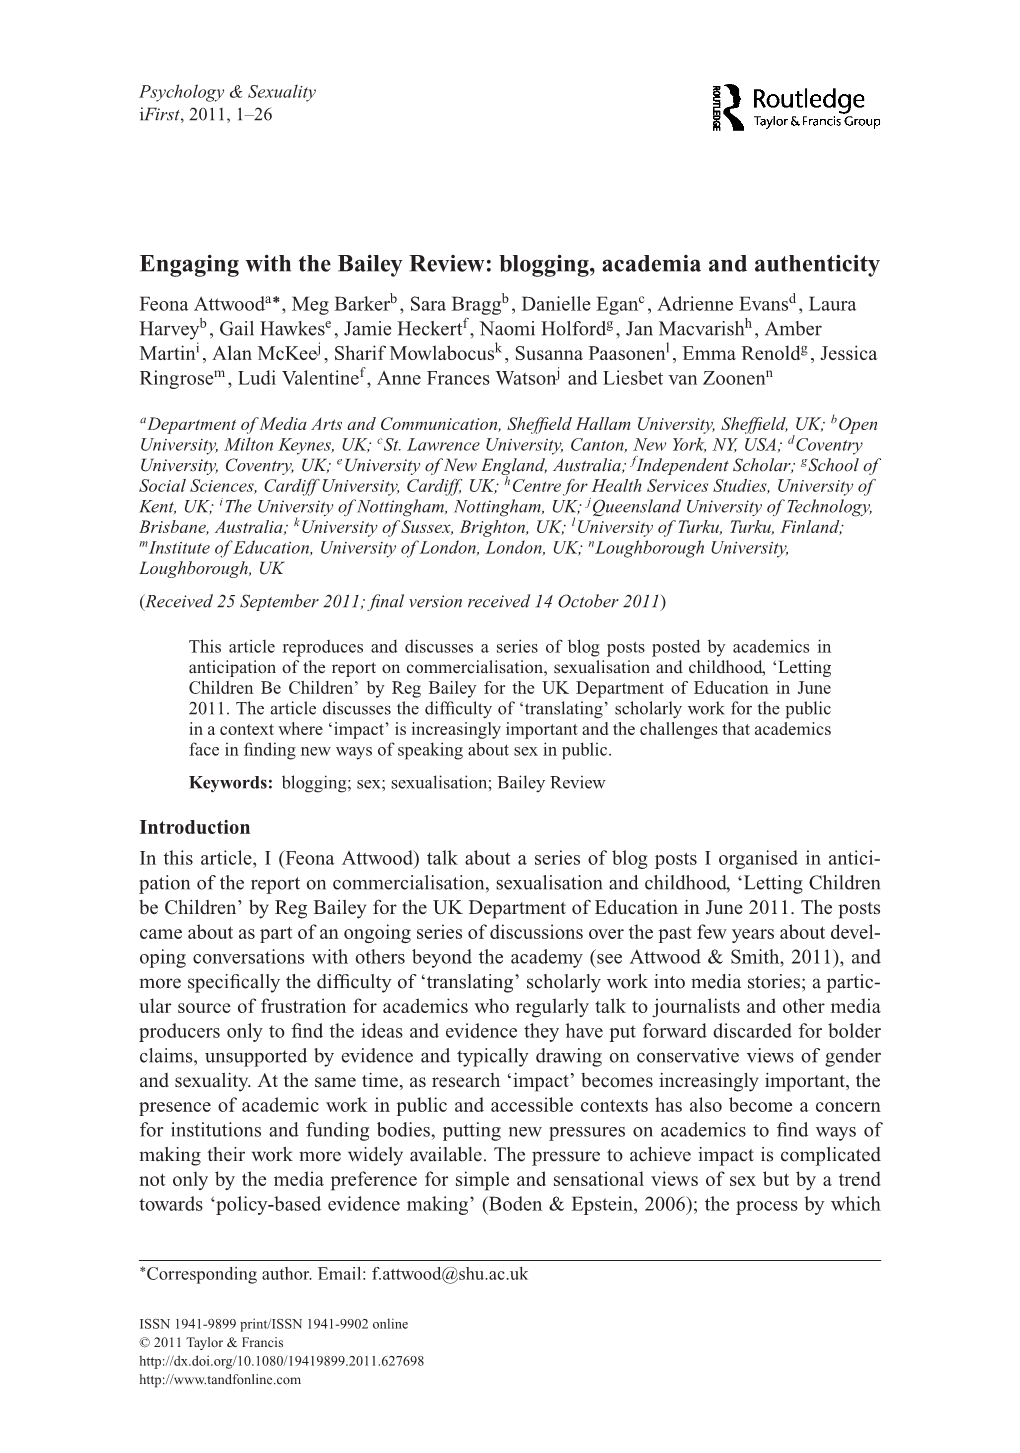 Engaging with the Bailey Review: Blogging, Academia and Authenticity